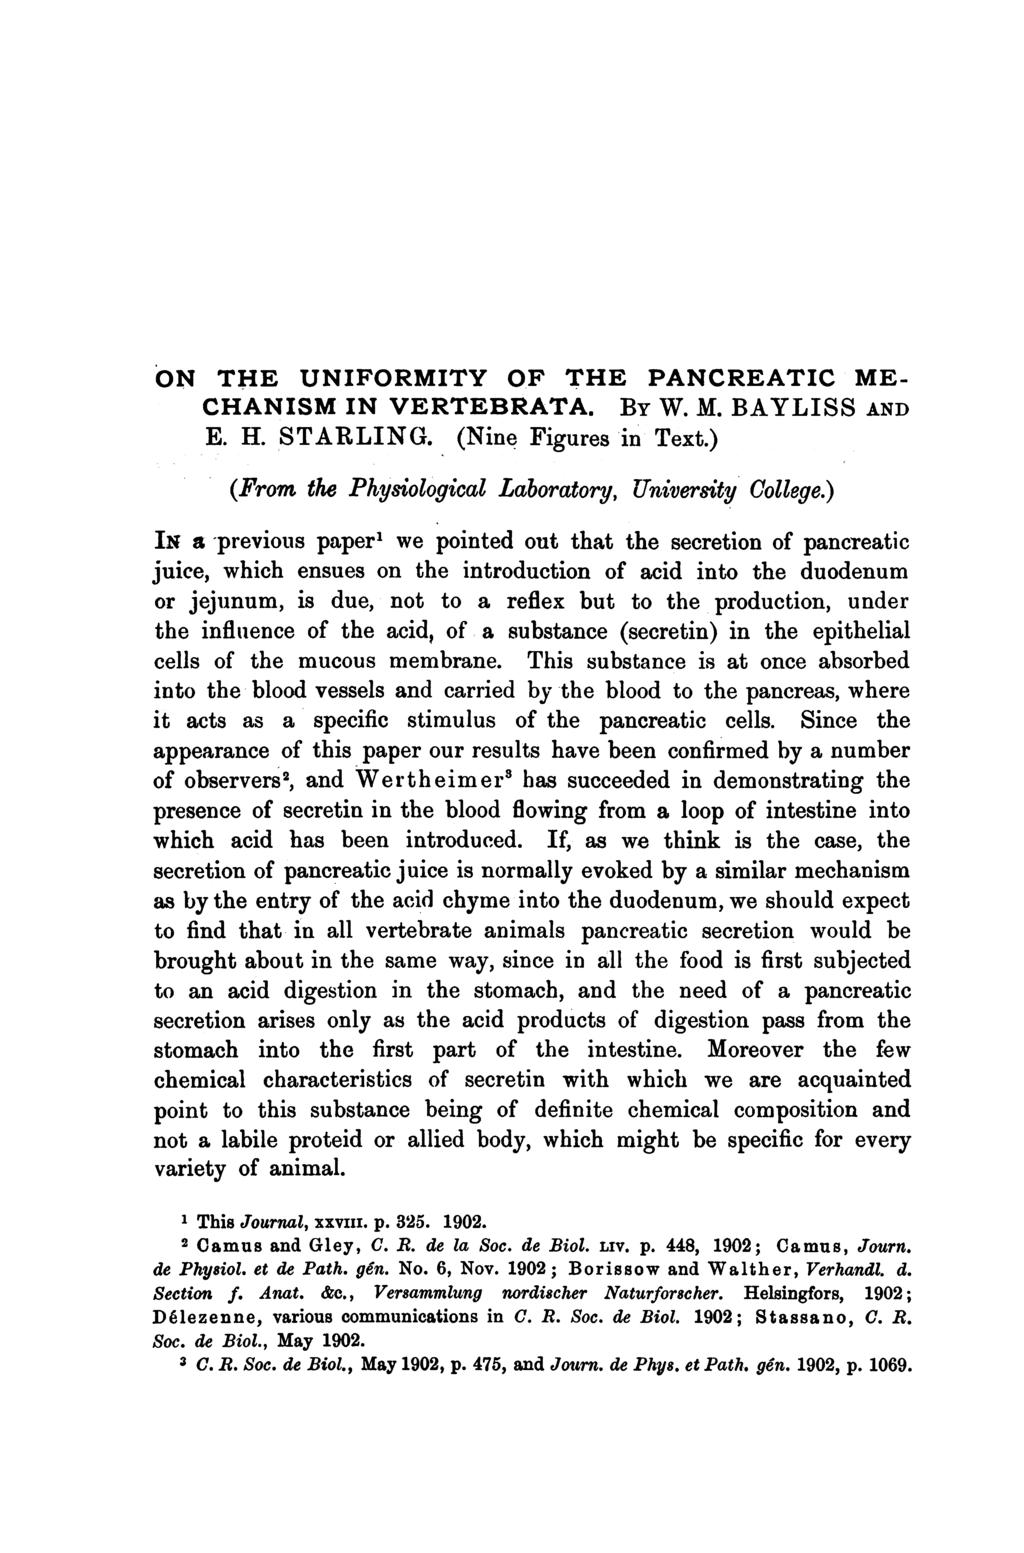 ON THE UNIFORMITY OF THE PANCREATIC ME- CHANISM IN VERTEBRATA. BY W. M. BAYLISS AND E. H. STARLING. (Nine Figures in Text.) (From the Physiological Laboratory, University College.